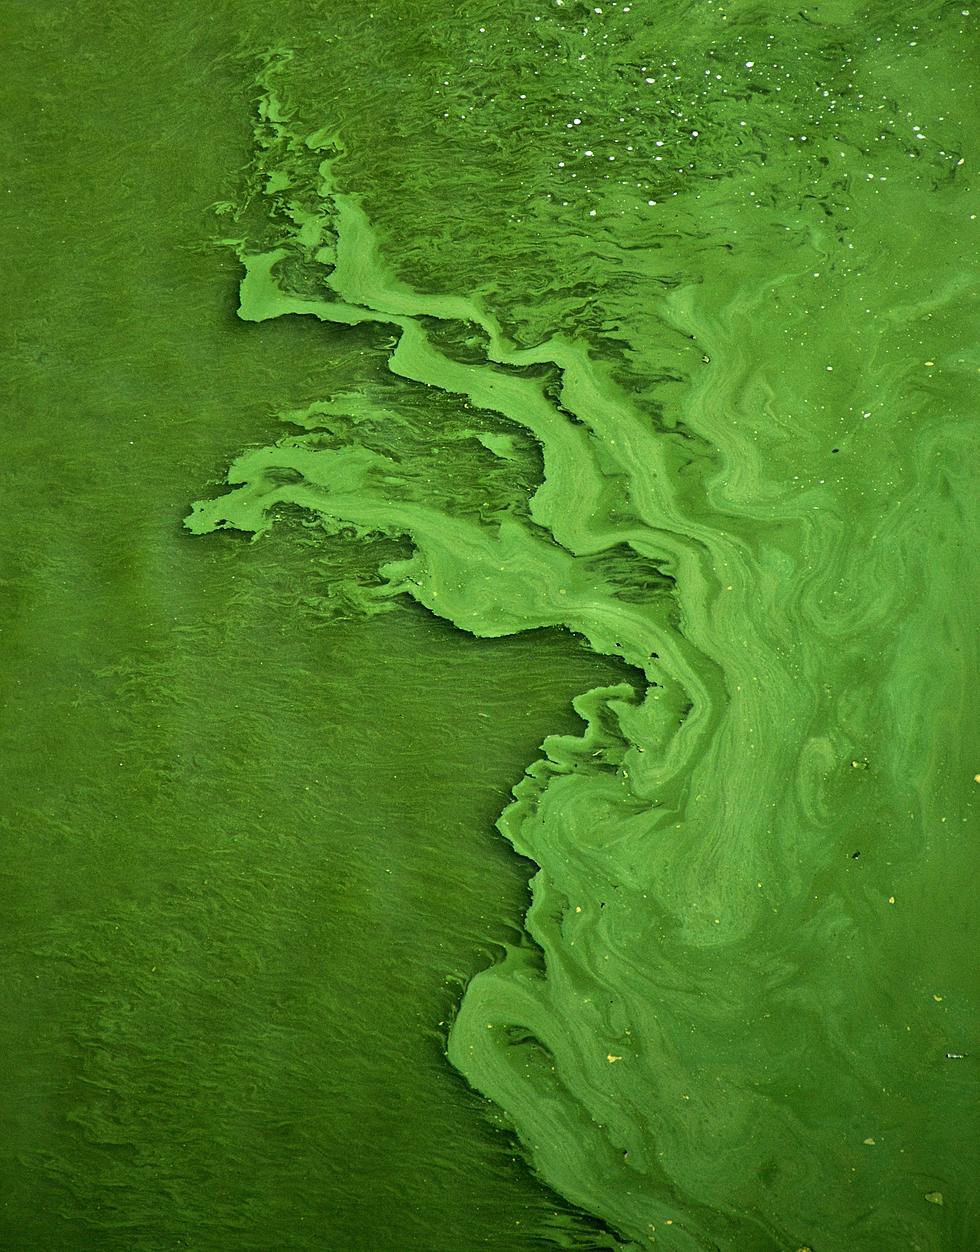 How to Find Out Where Dangerous Blue Algae Is in Montana's Waters